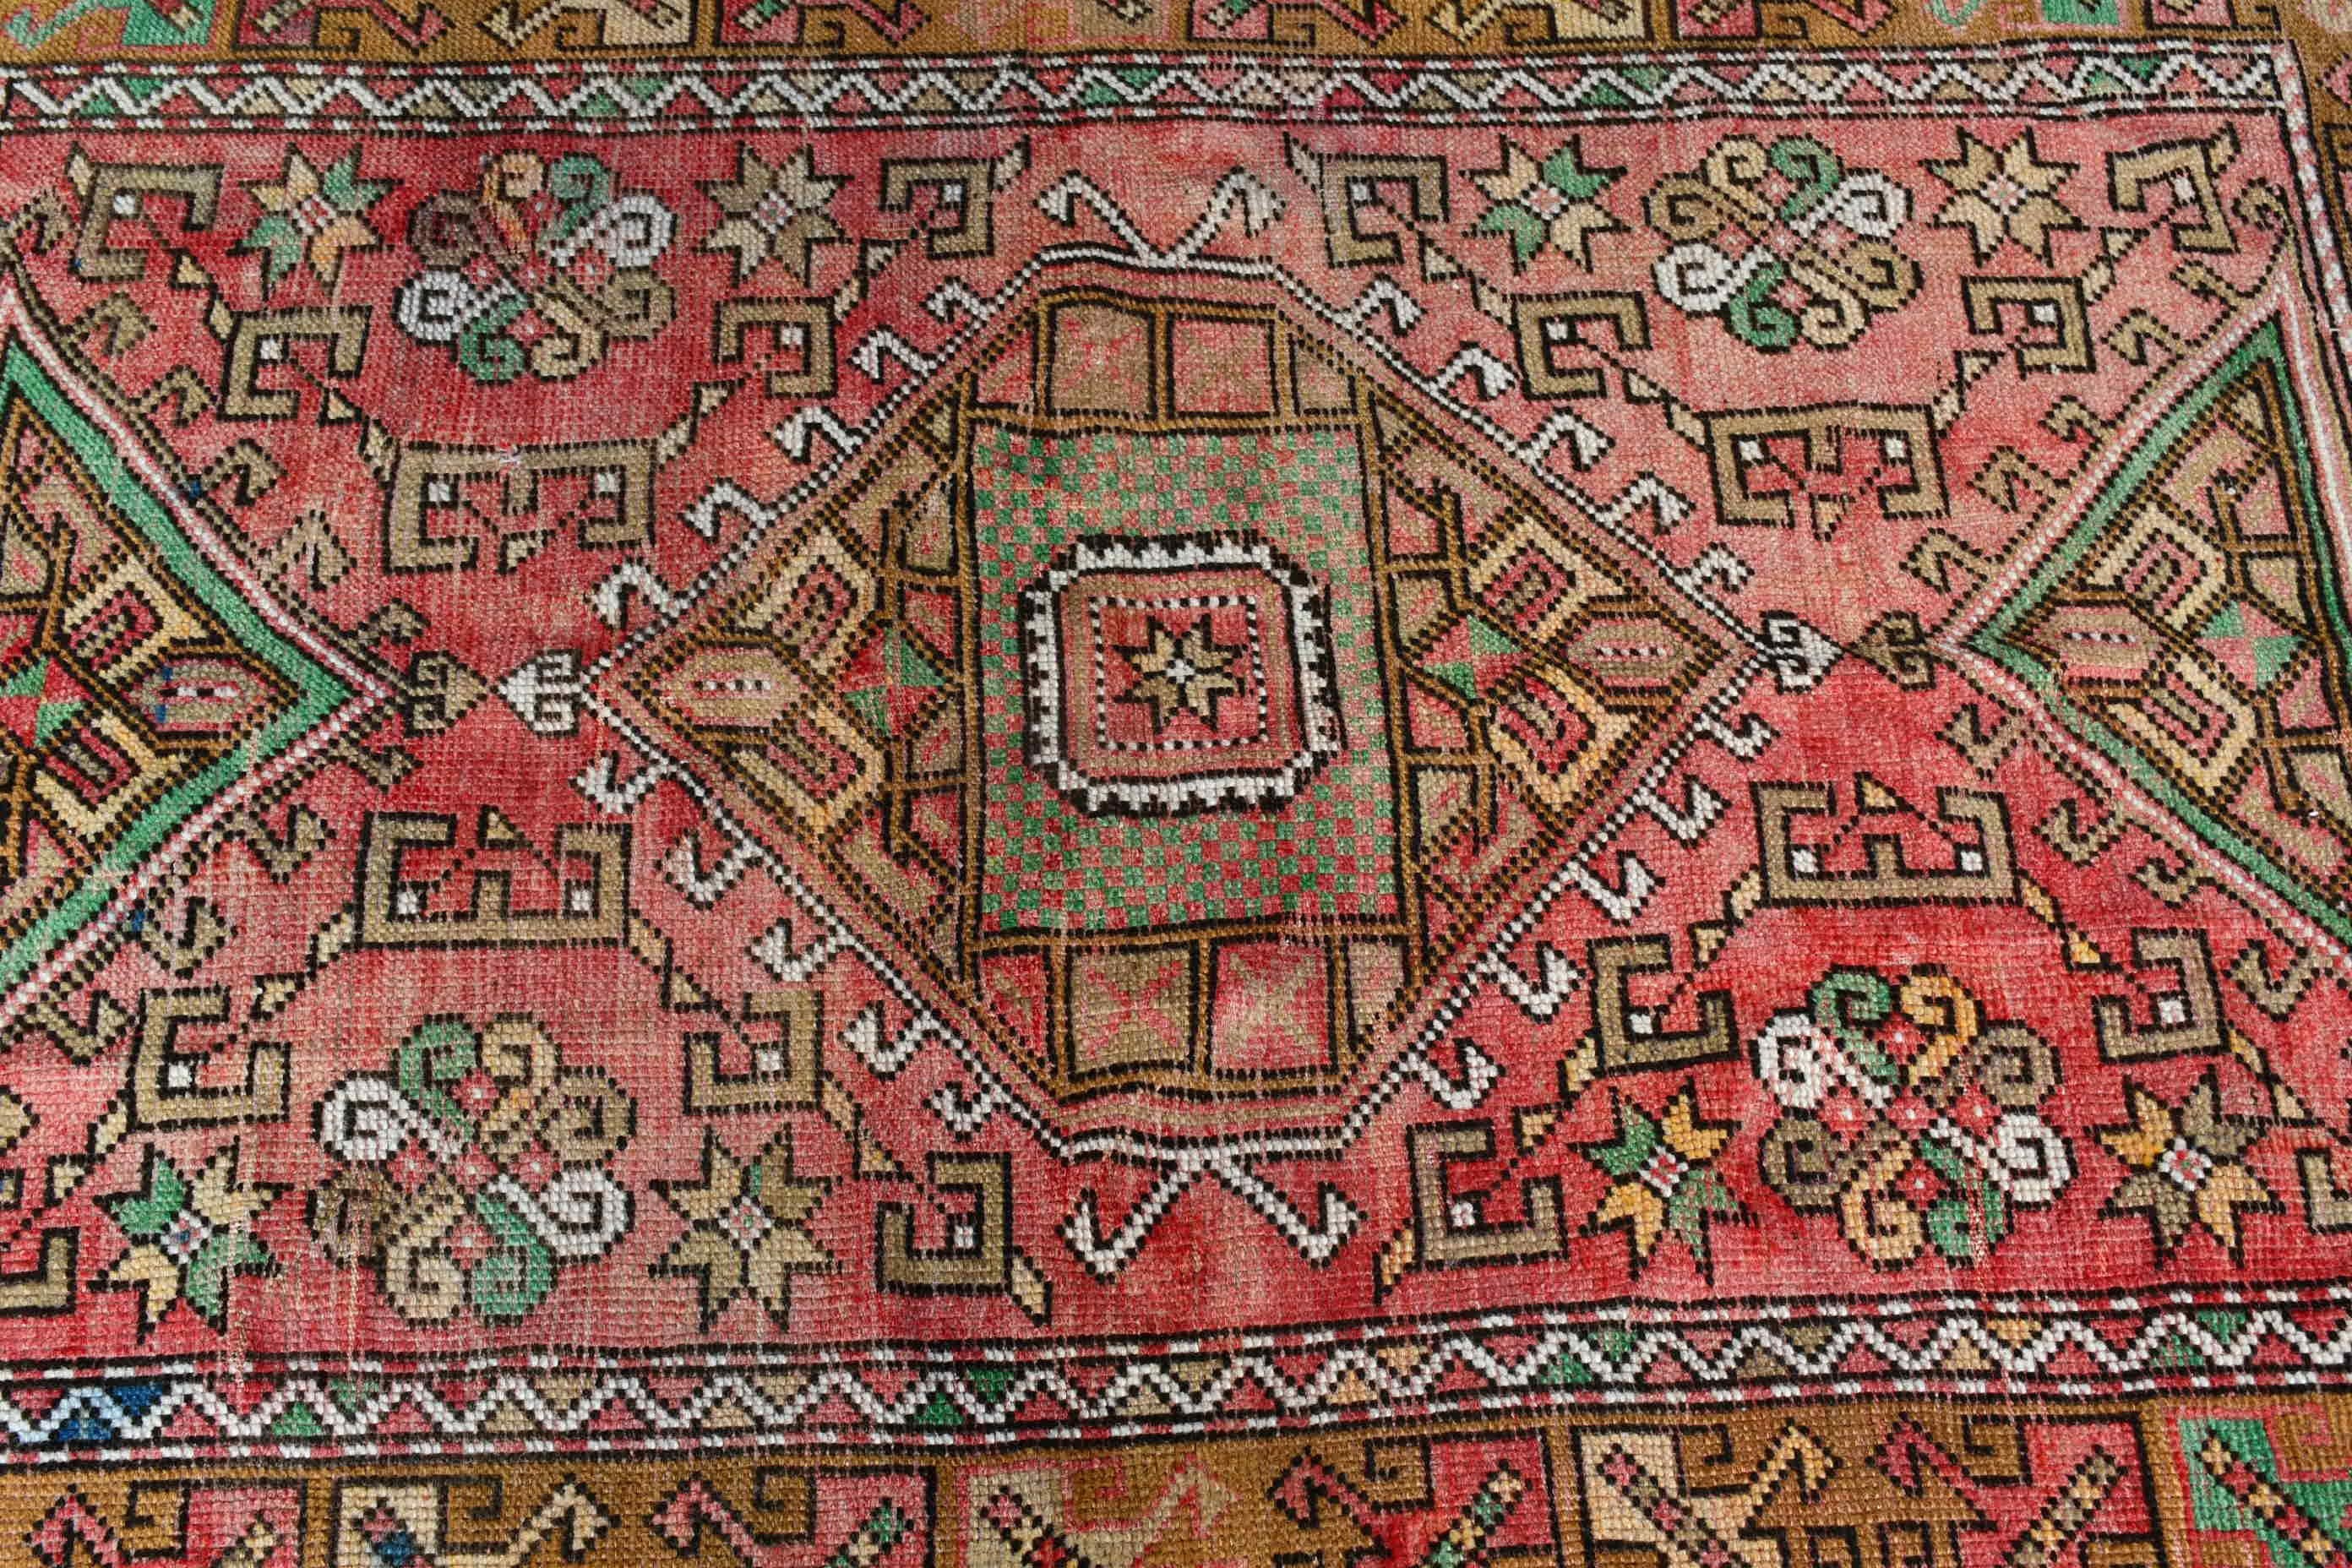 Vintage Rug, Turkish Rugs, Antique Rugs, Nursery Rug, 3.8x5.7 ft Accent Rugs, Bedroom Rug, Red Kitchen Rug, Rugs for Kitchen